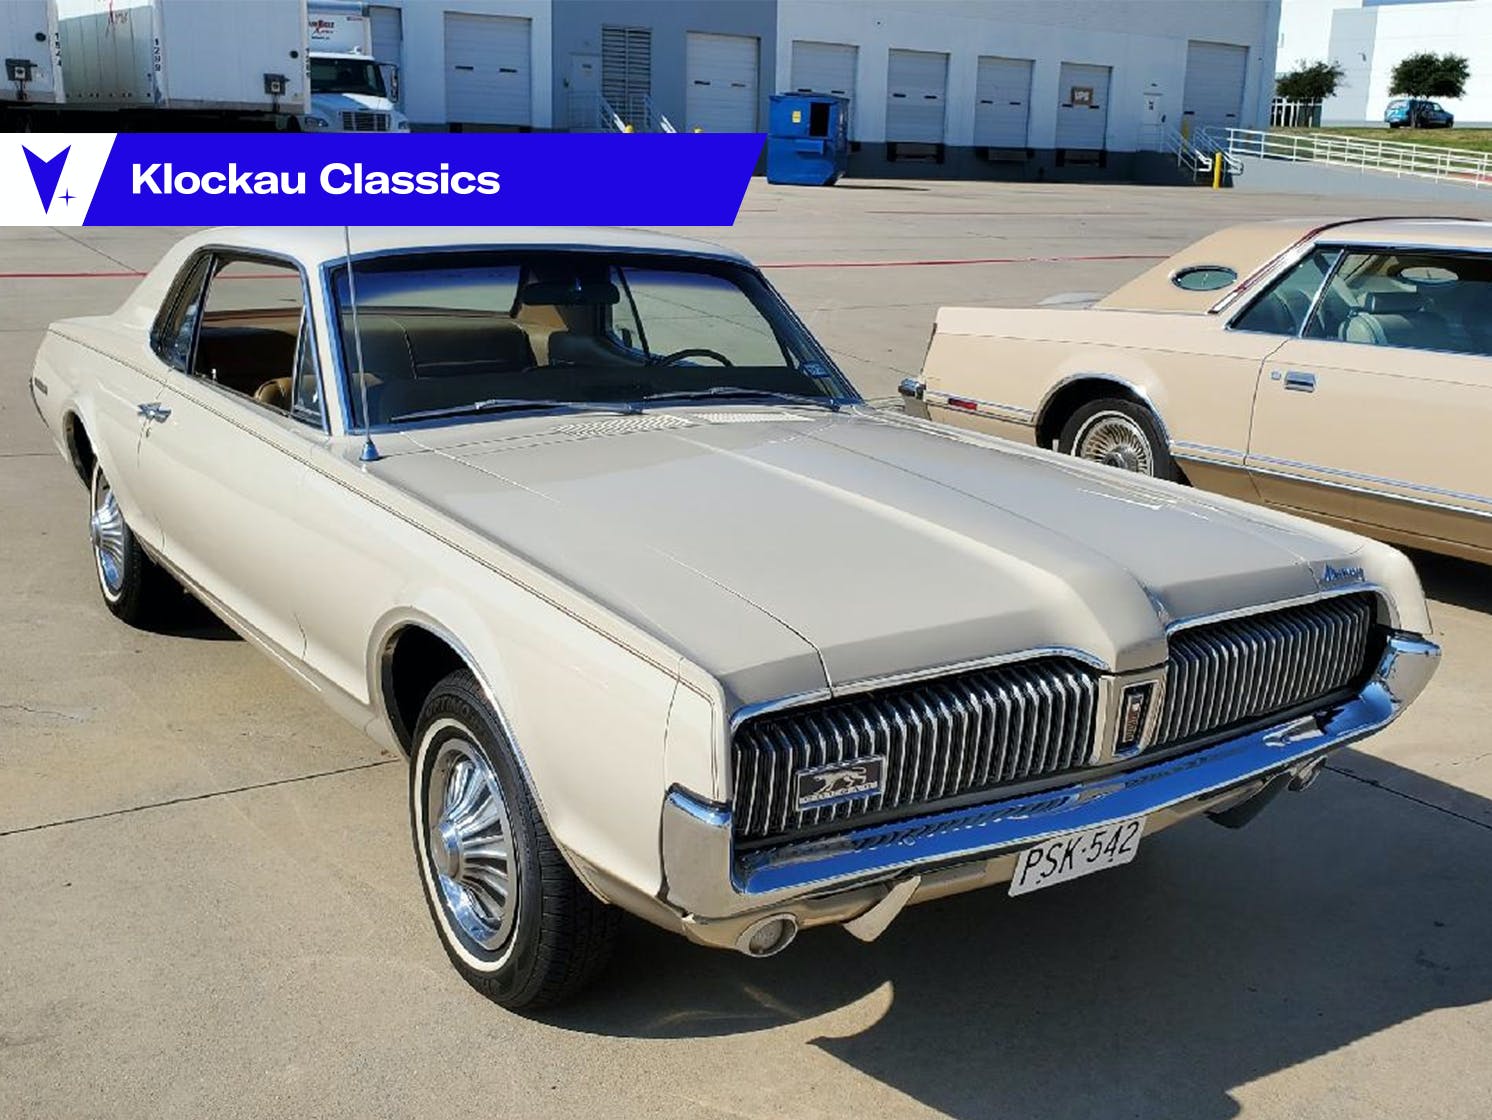 1967 Mercury Cougar: The pony car goes Brougham - Hagerty Media